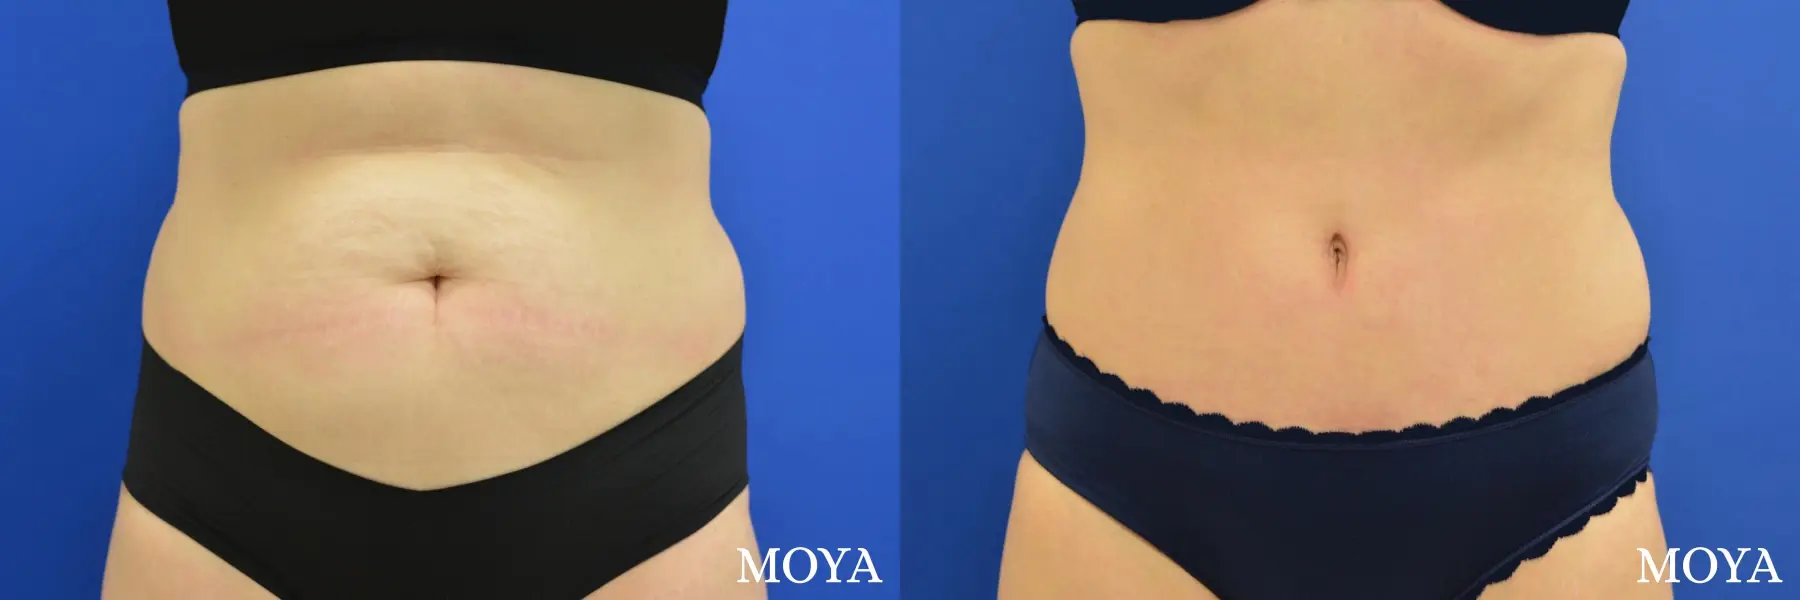 tummy tuck (standard) - Before and After 3